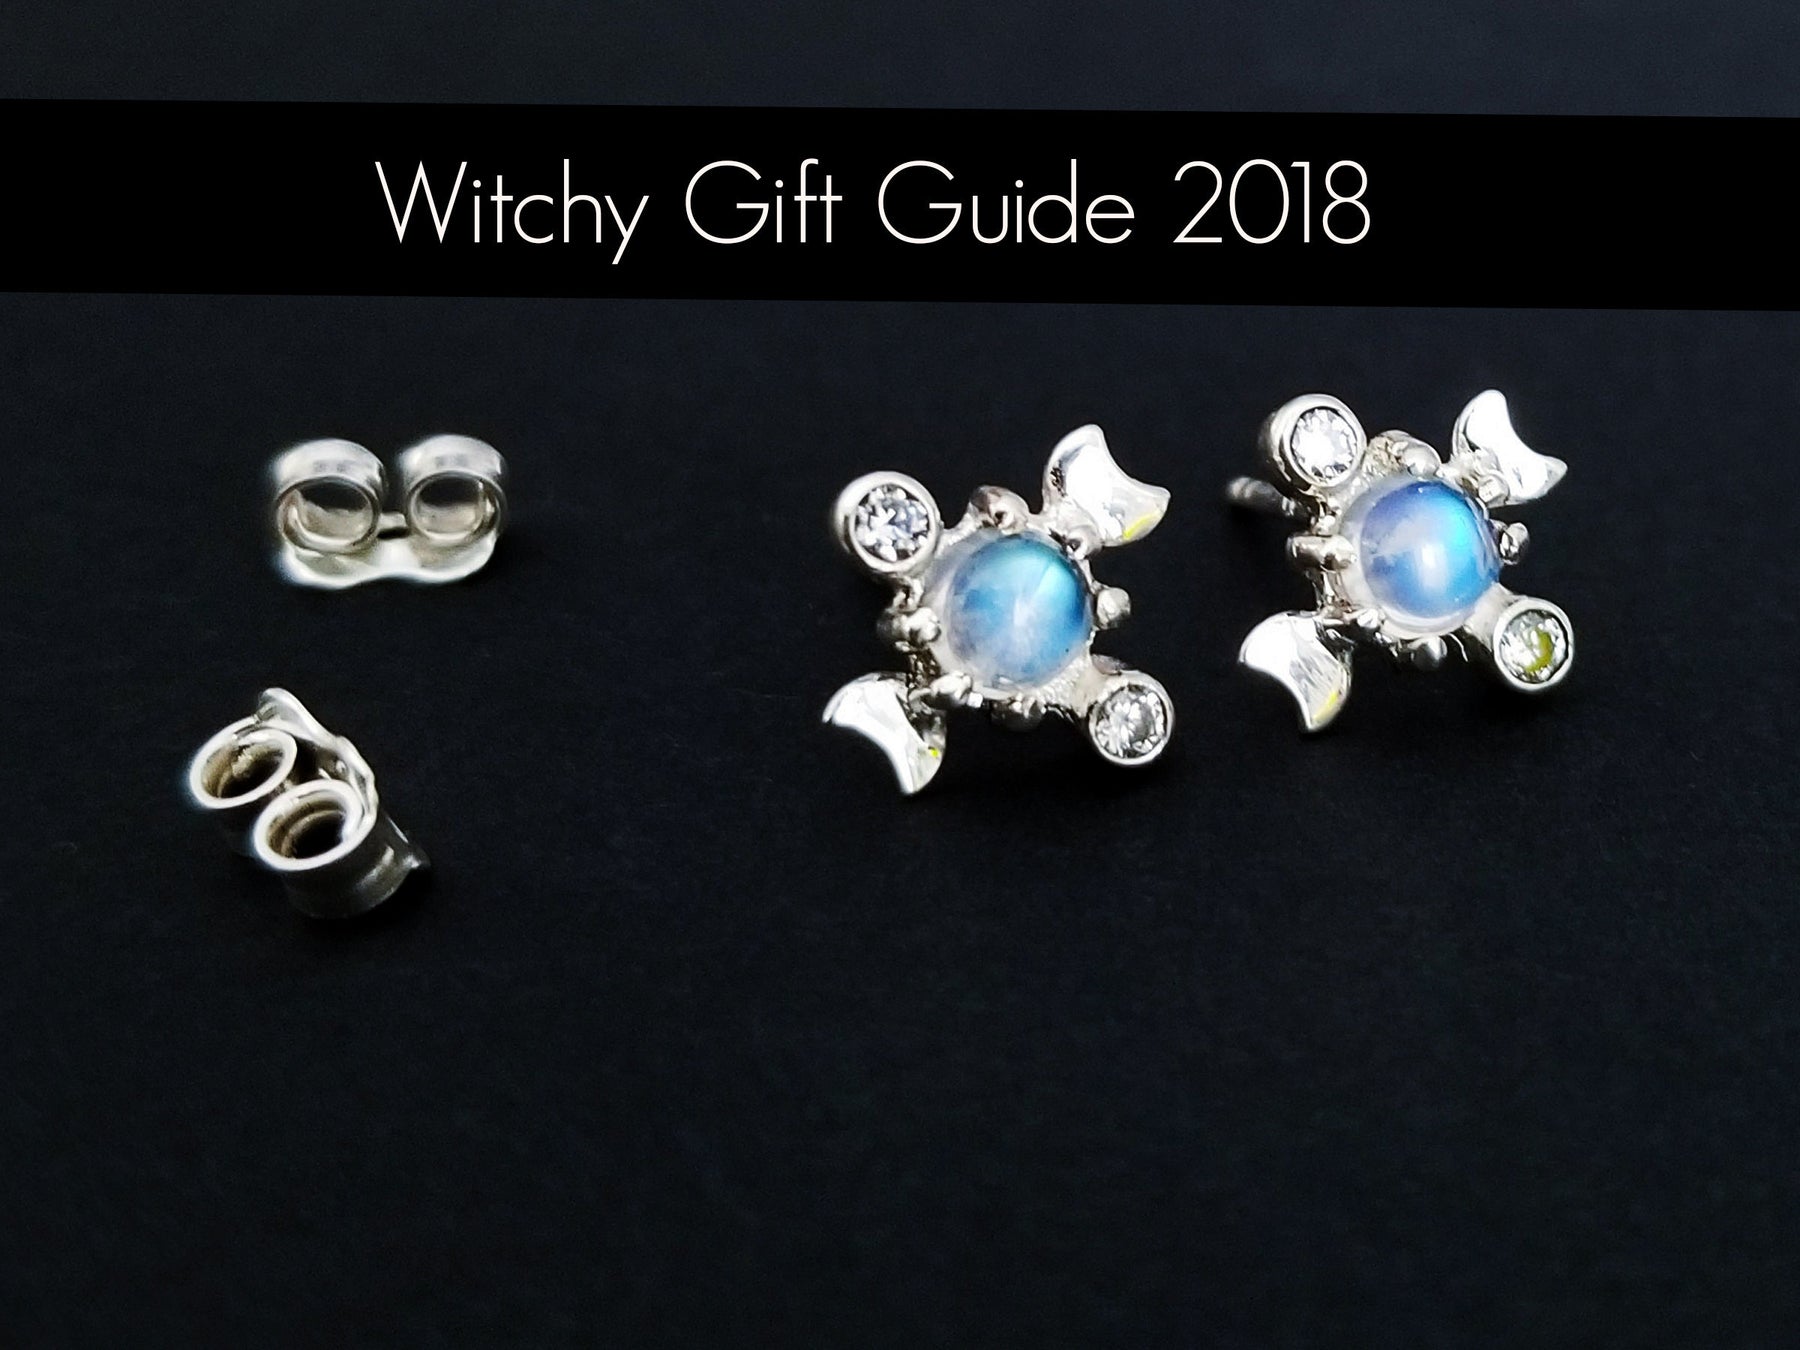 Witchy Gift Guide 2018